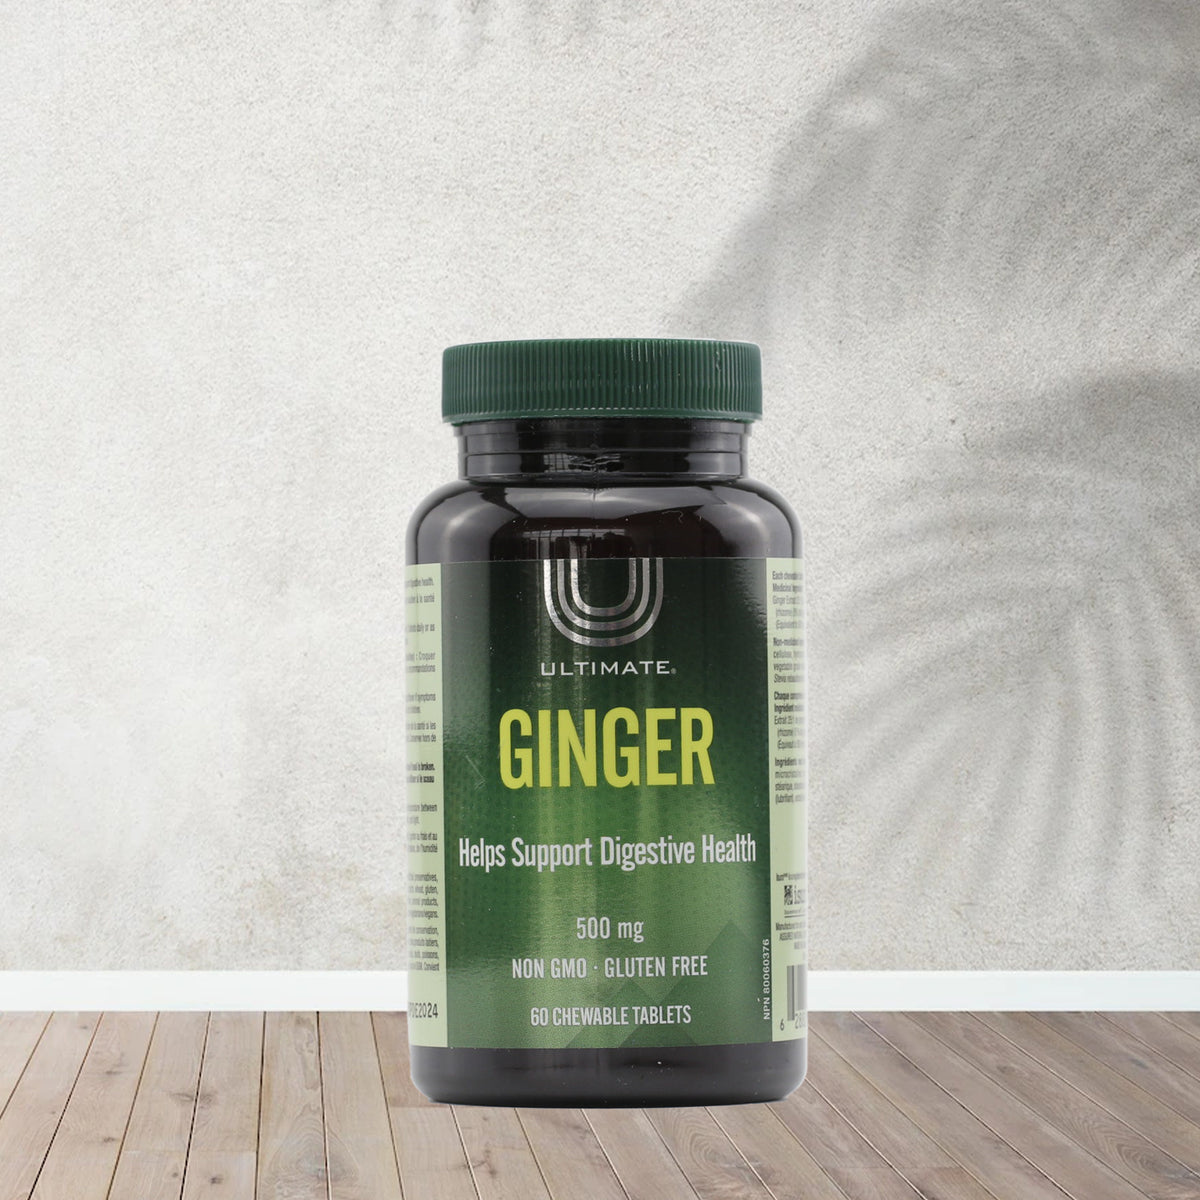 Ultimate Ginger - Helps Support Digestive Health 500 mg, 60 Chewable Tablets